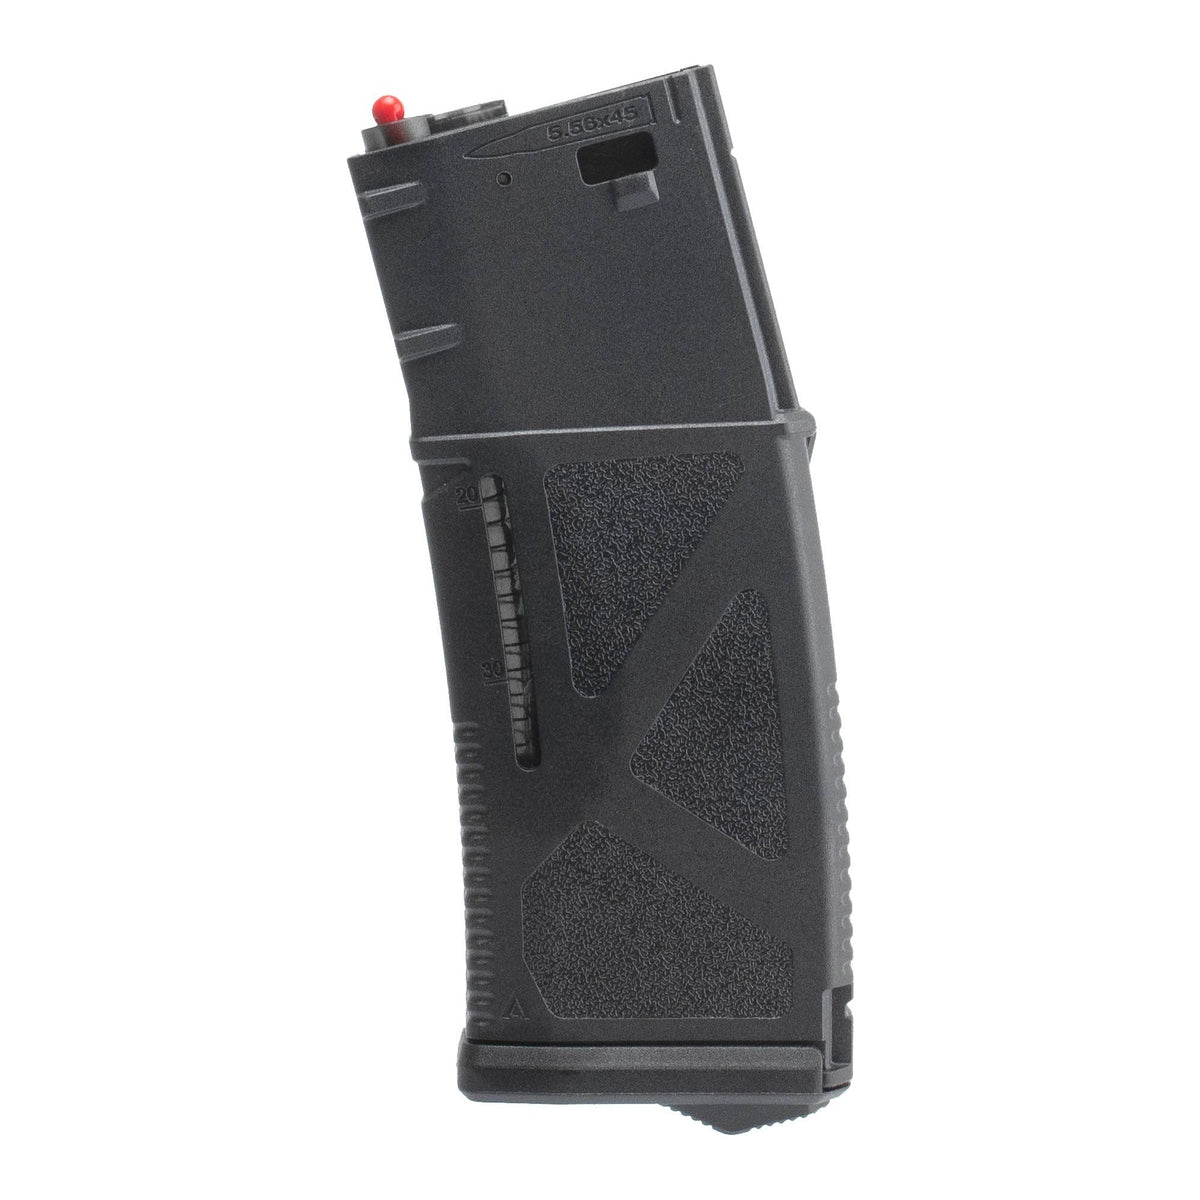 Chargeur M4/M16 Arcturus 30/130 RDS